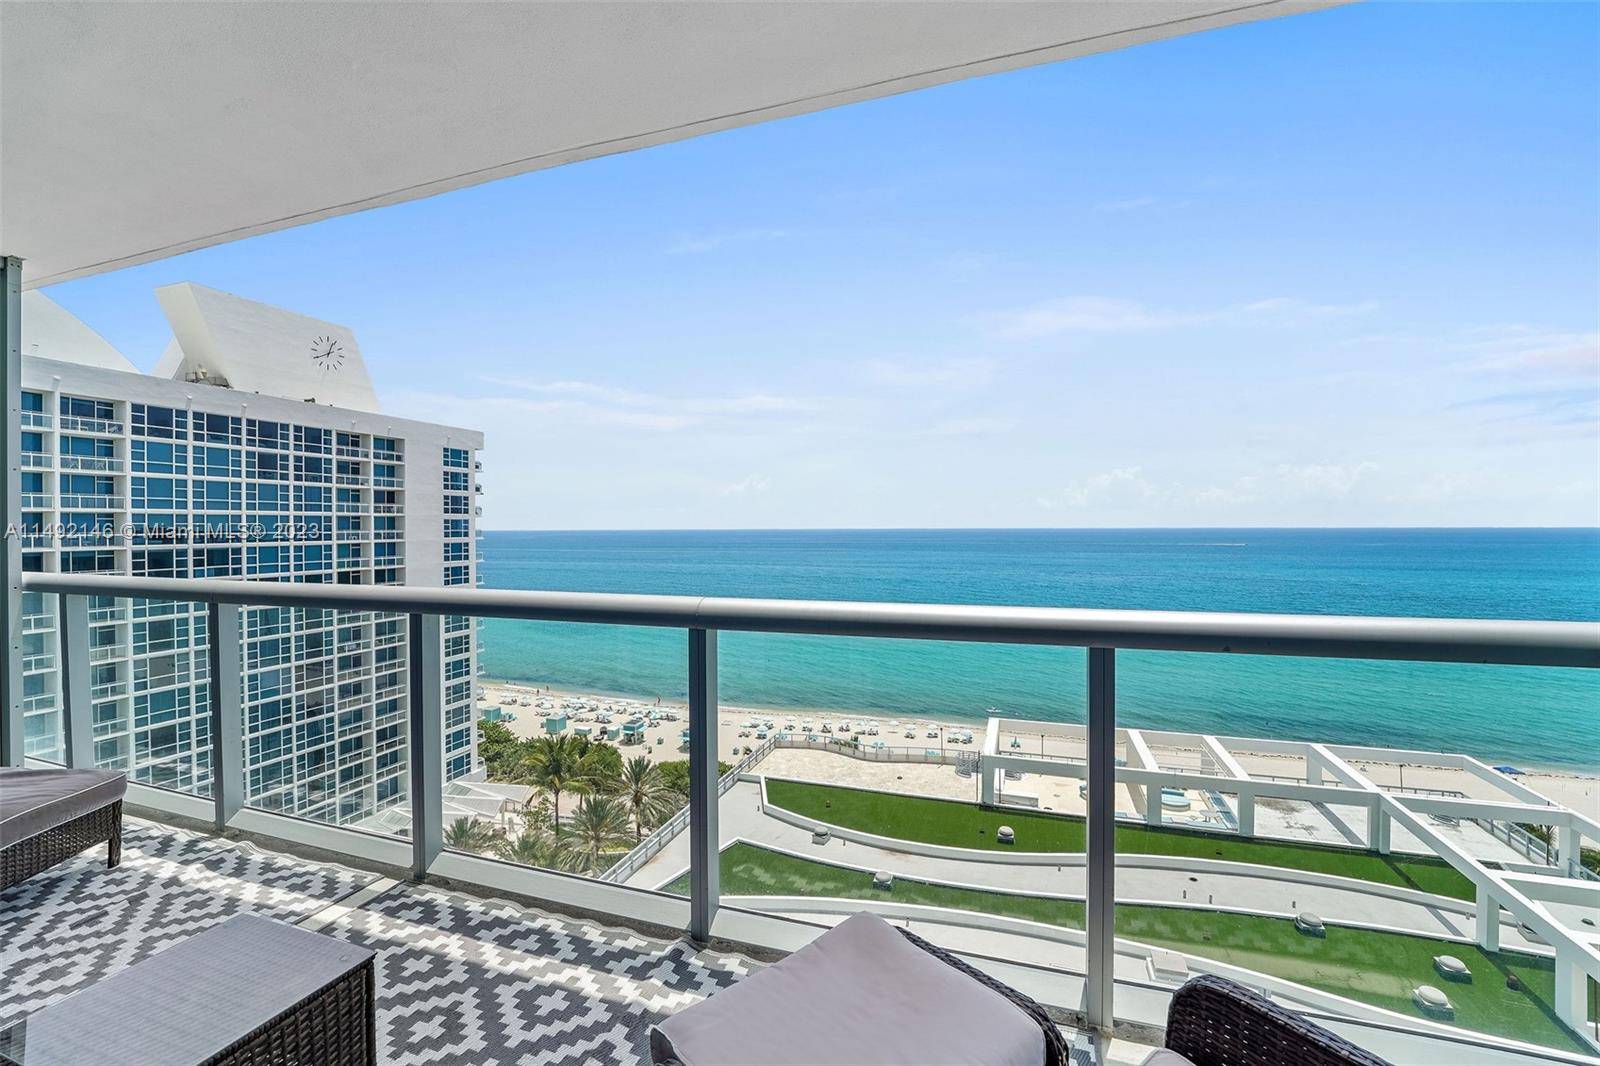 Rarely offered DIRECT OCEAN VIEW from all rooms, 1 bedroom, 1 ½ bathroom unit at Carillon Miami Wellness Resort, a premier oceanfront luxury property.